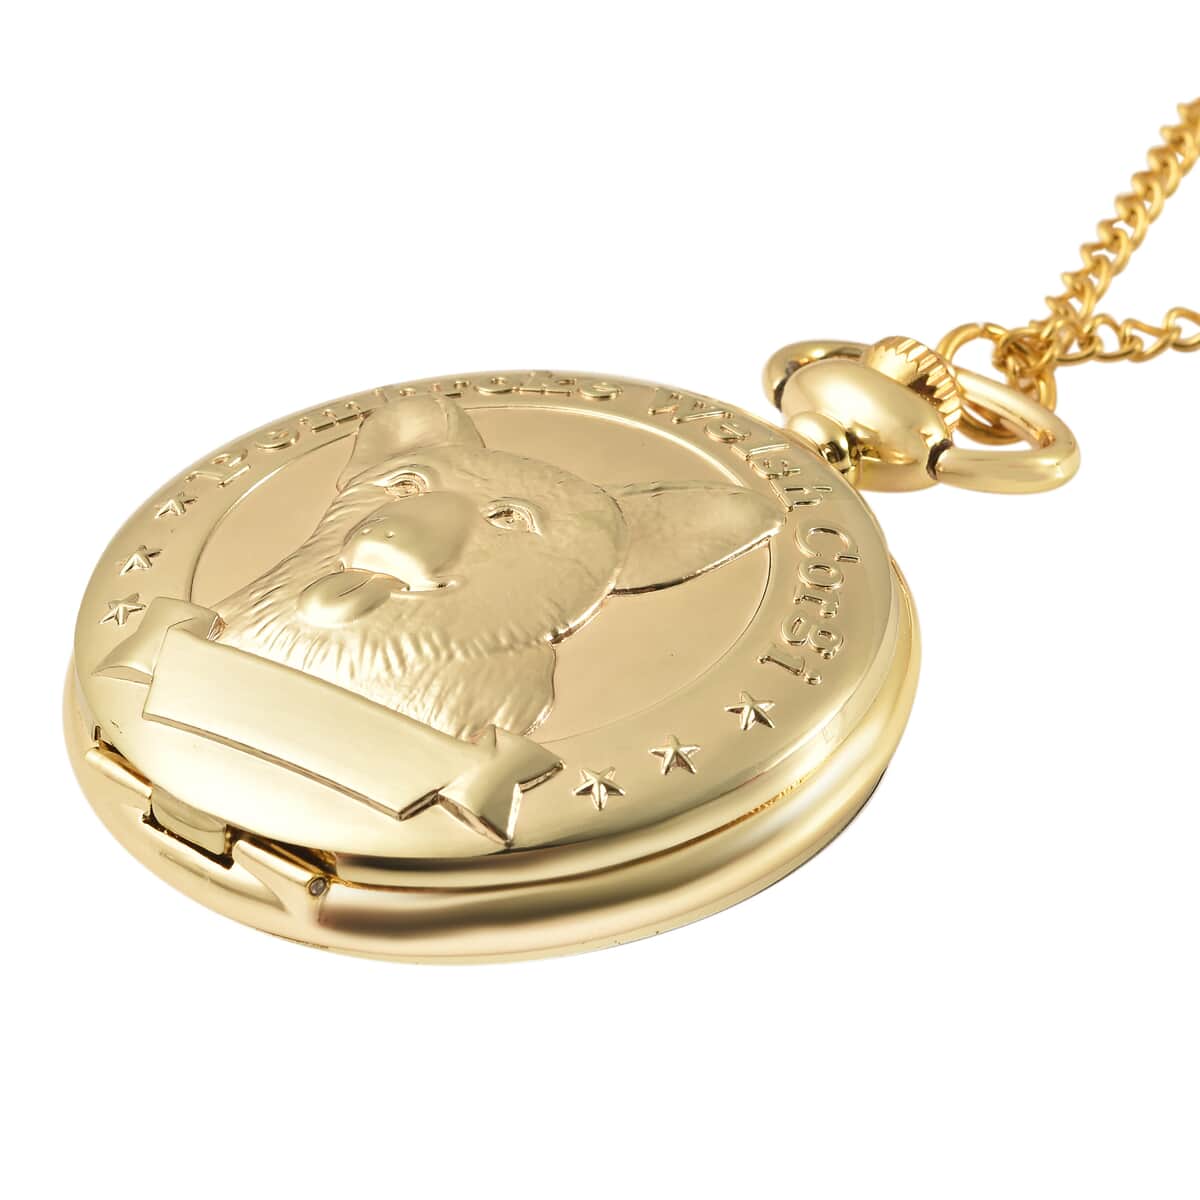 Strada Japanese Movement Corgi Pocket Watch in Goldtone with Chain (31 Inches) image number 2